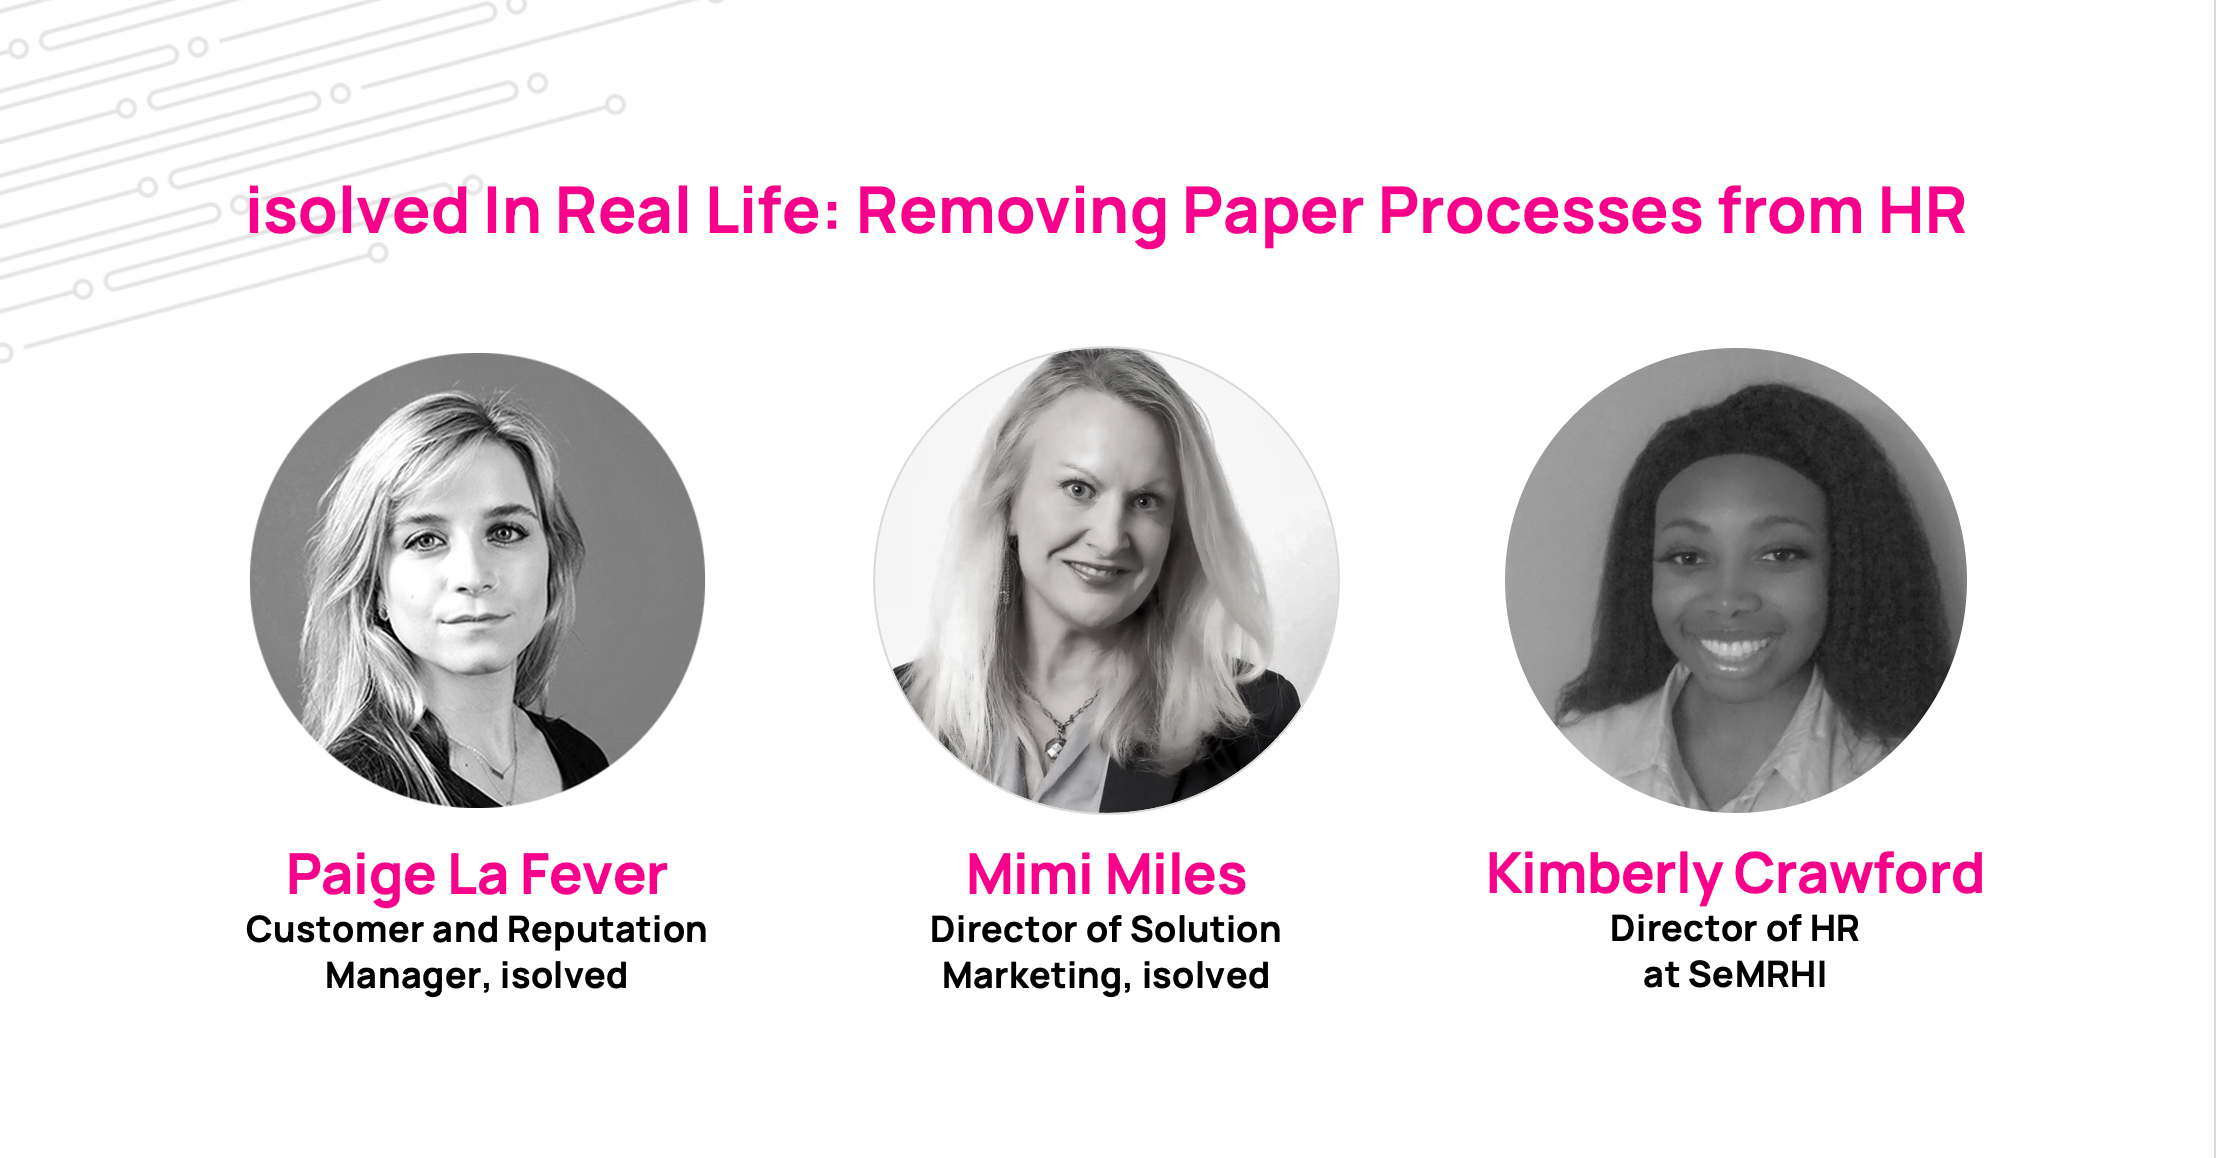 In Real Life: Removing Paper Processes from HR